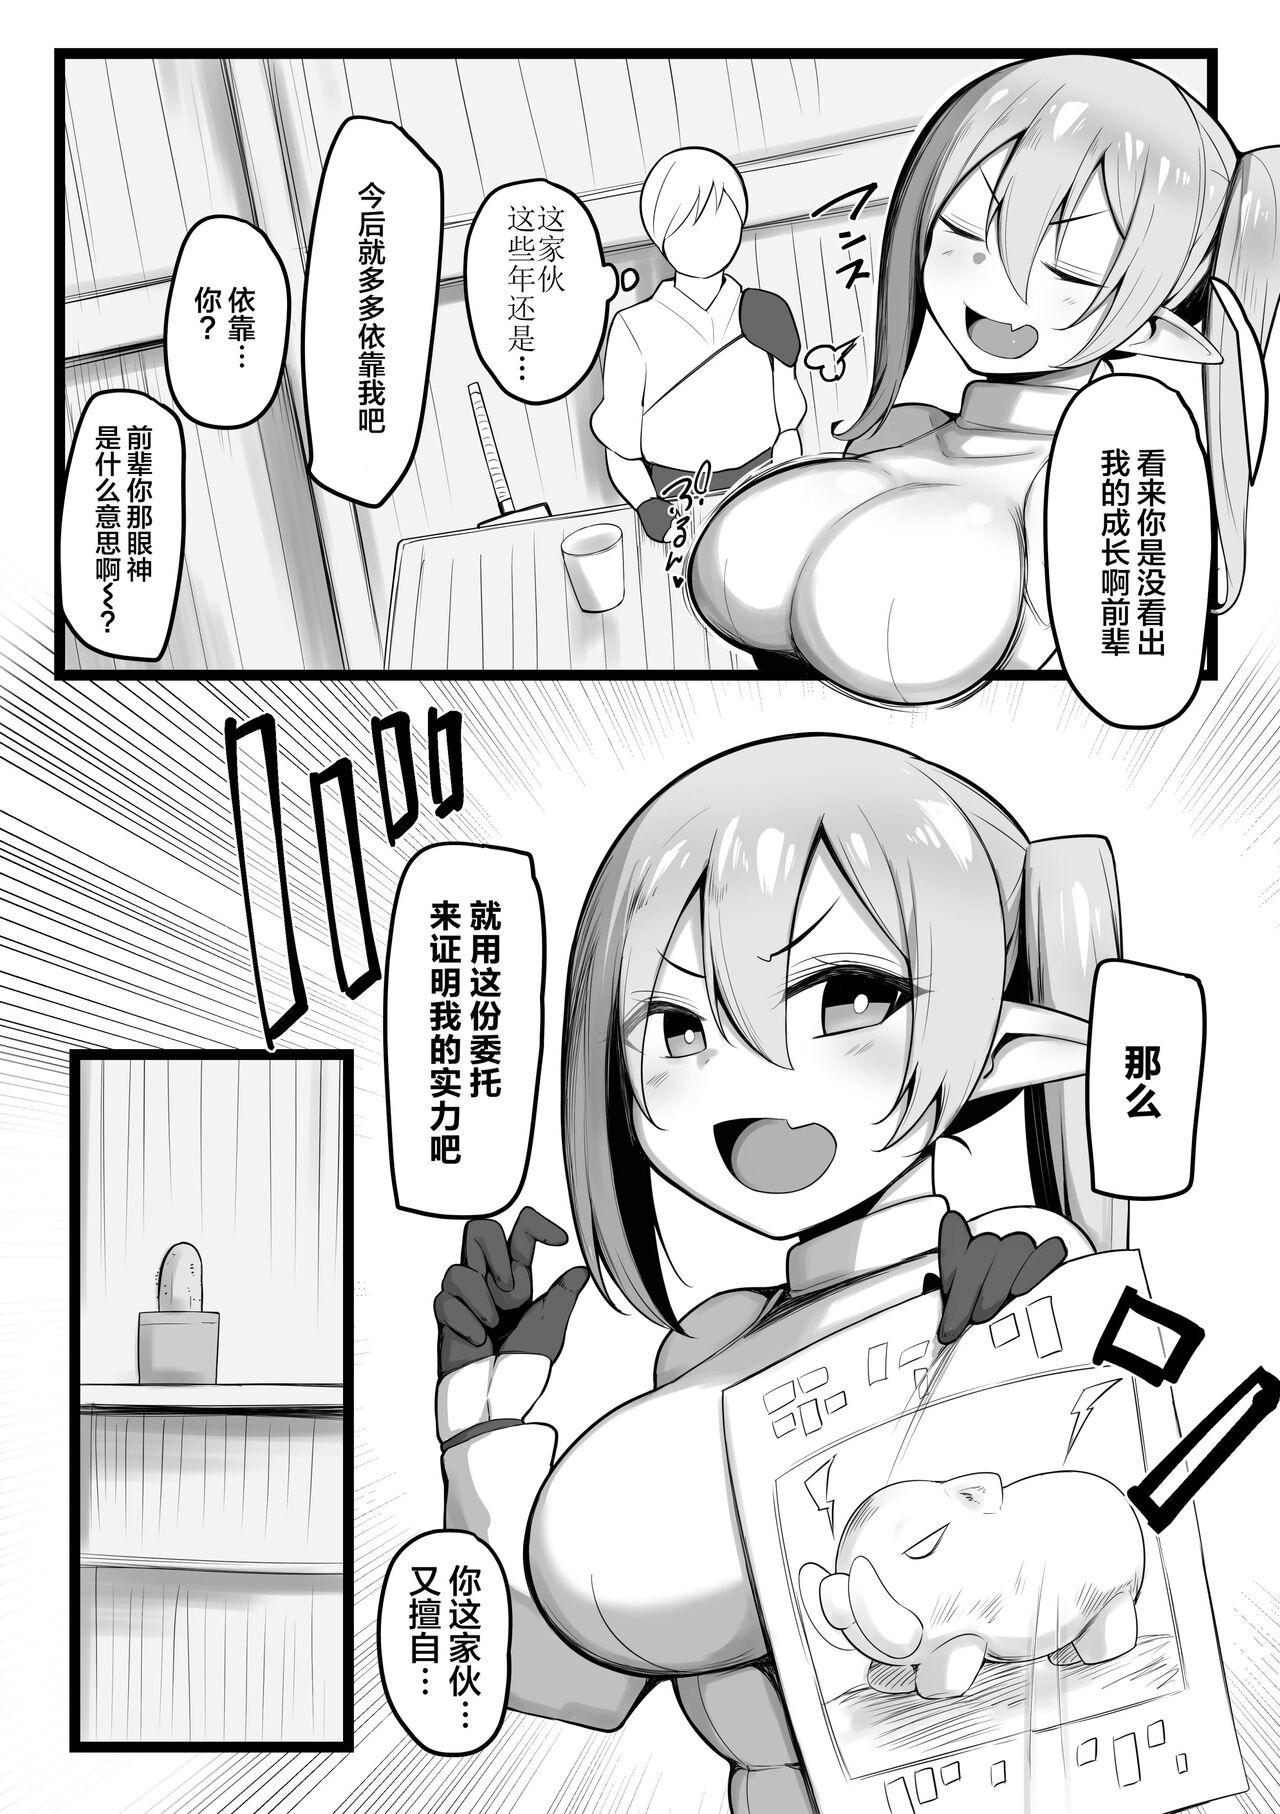 Game NTR Guild Gros Seins - Page 4